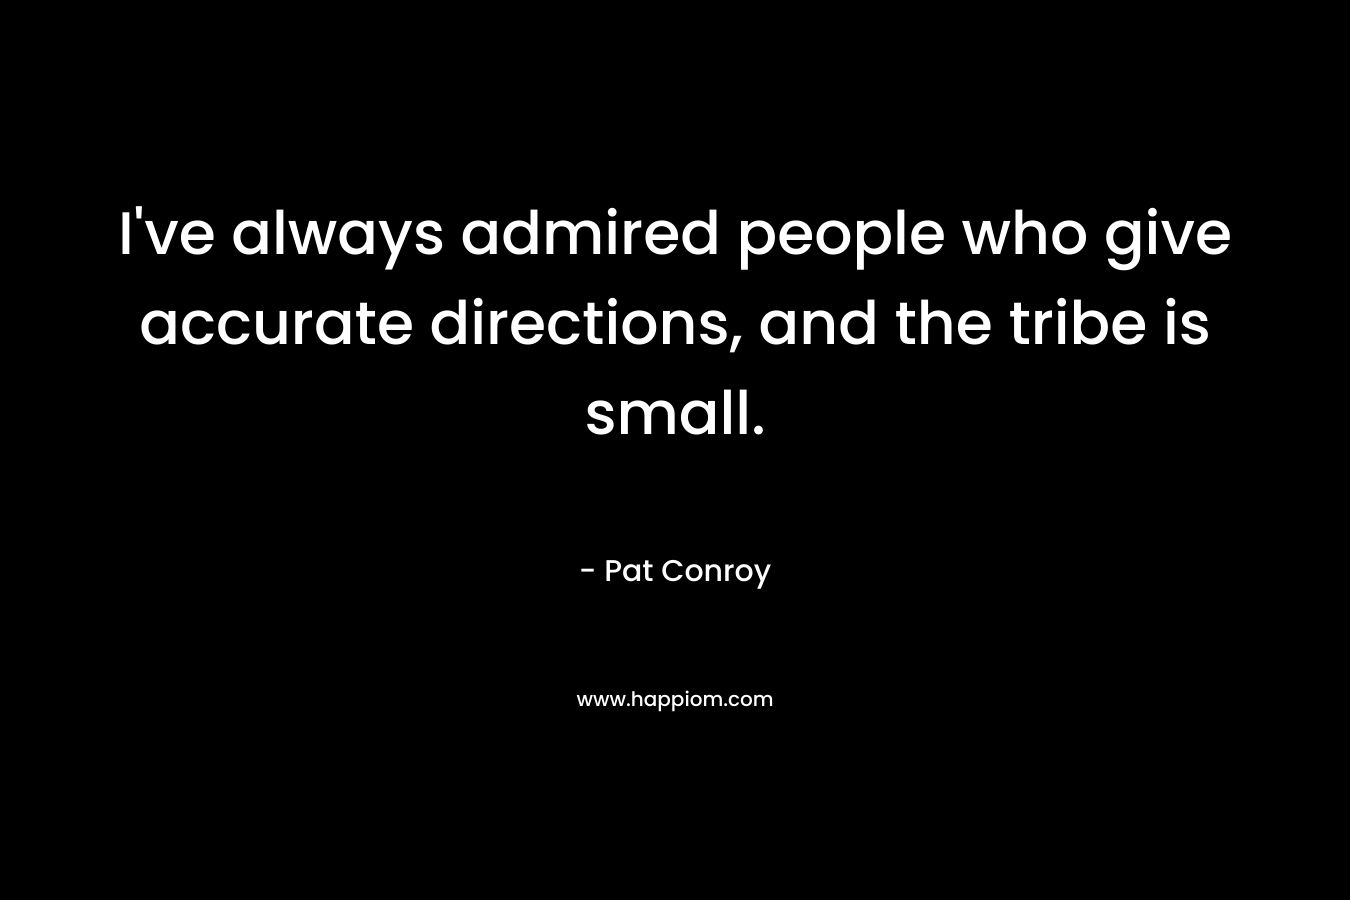 I’ve always admired people who give accurate directions, and the tribe is small. – Pat Conroy